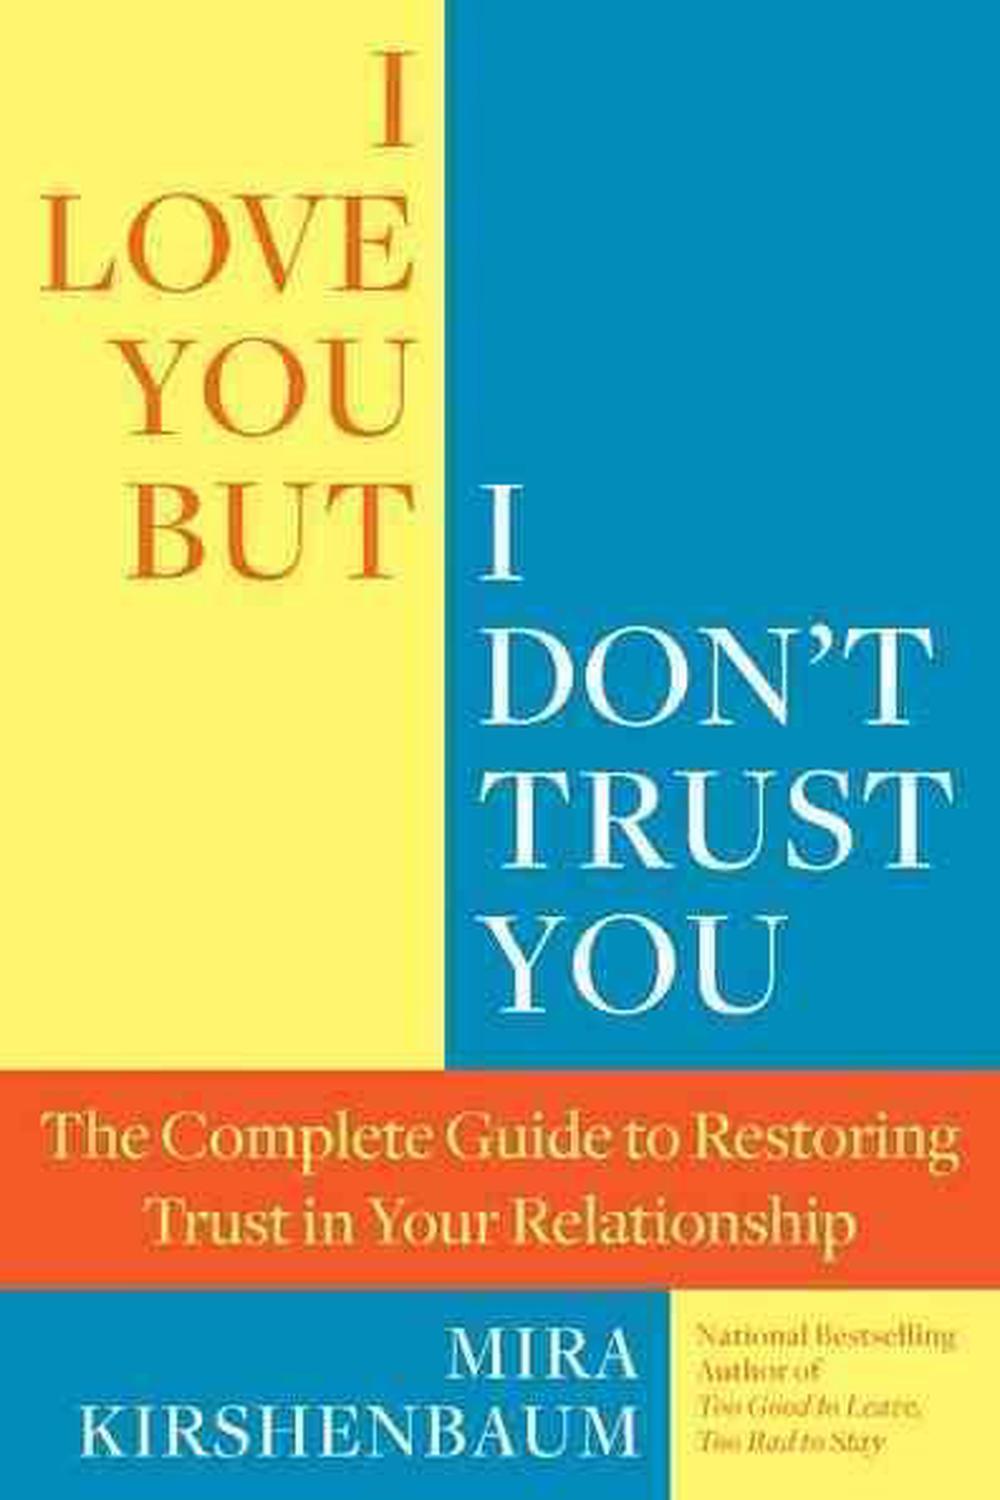 I Love You, But I Don't Trust You The Complete Guide to Restoring Trust in Your Relationship by